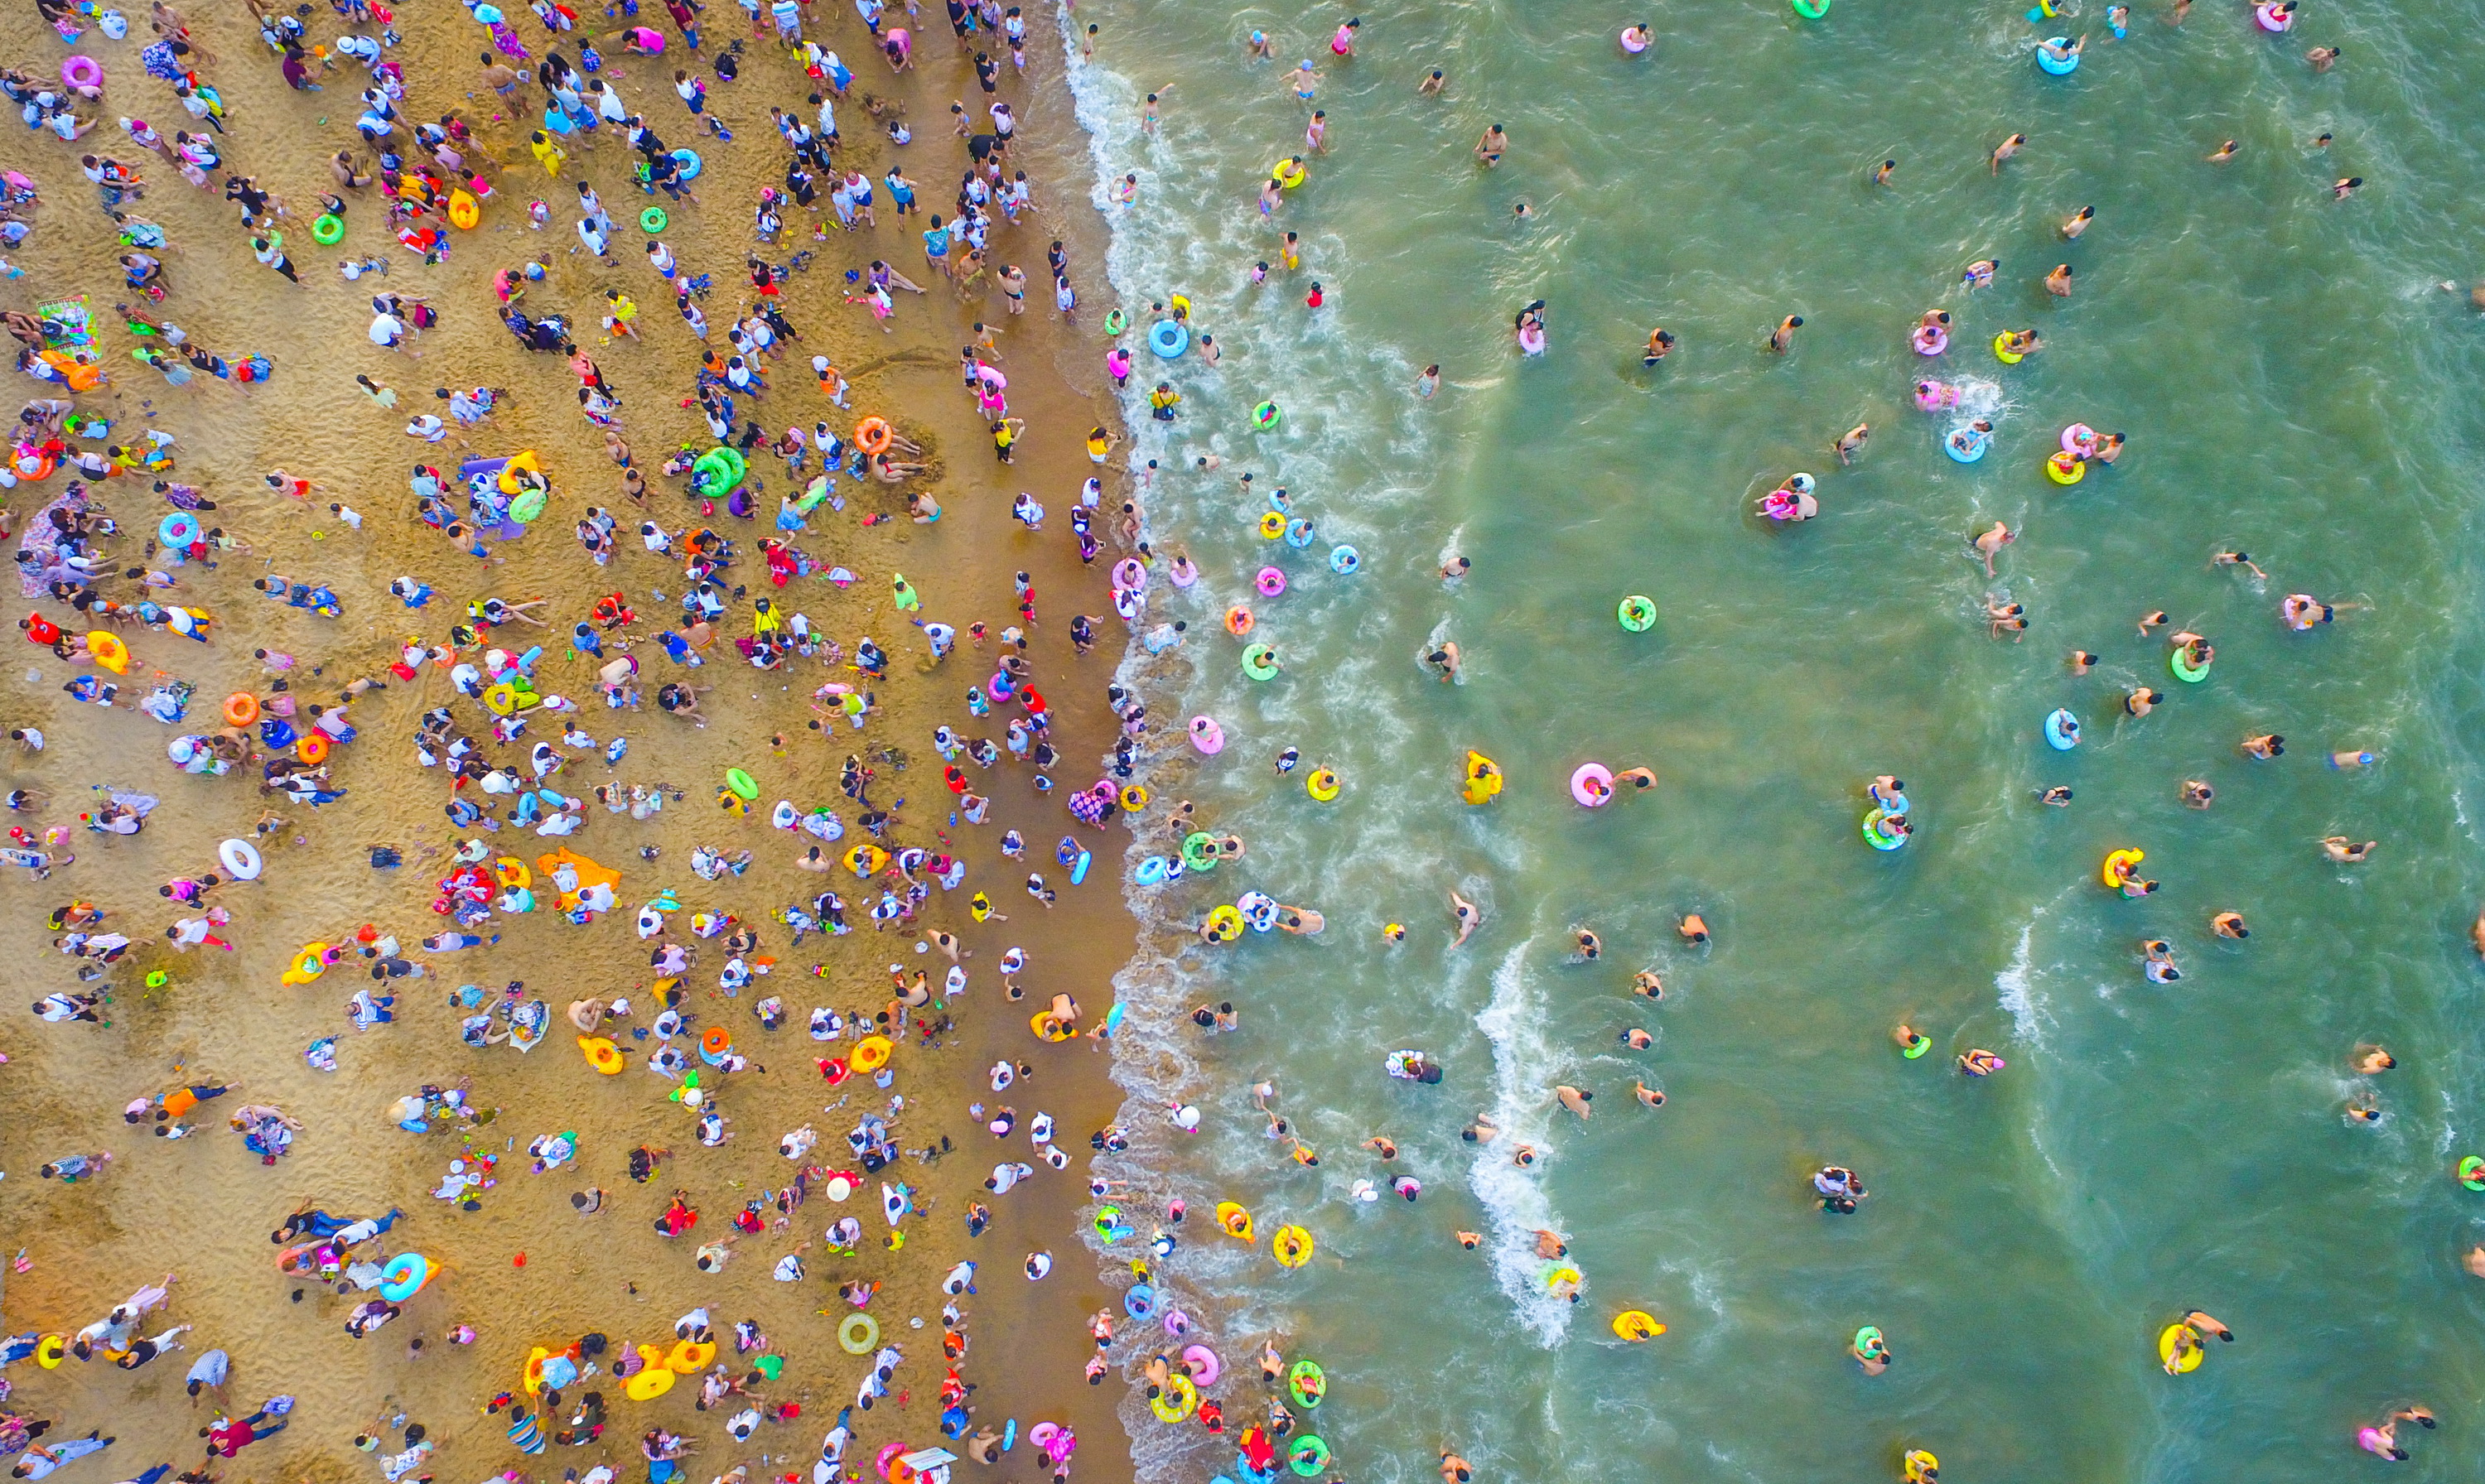 Slide 9 of 39: HAIKOU, CHINA - MAY 30:  Aerial view of crowd at beach on May 30, 2017 in Haikou, Hainan Province of China. Thousands of people came to the beach in Haikou on the Dragon Boat Festival (aka Duanwu Festival).  (Photo by VCG/VCG via Getty Images)